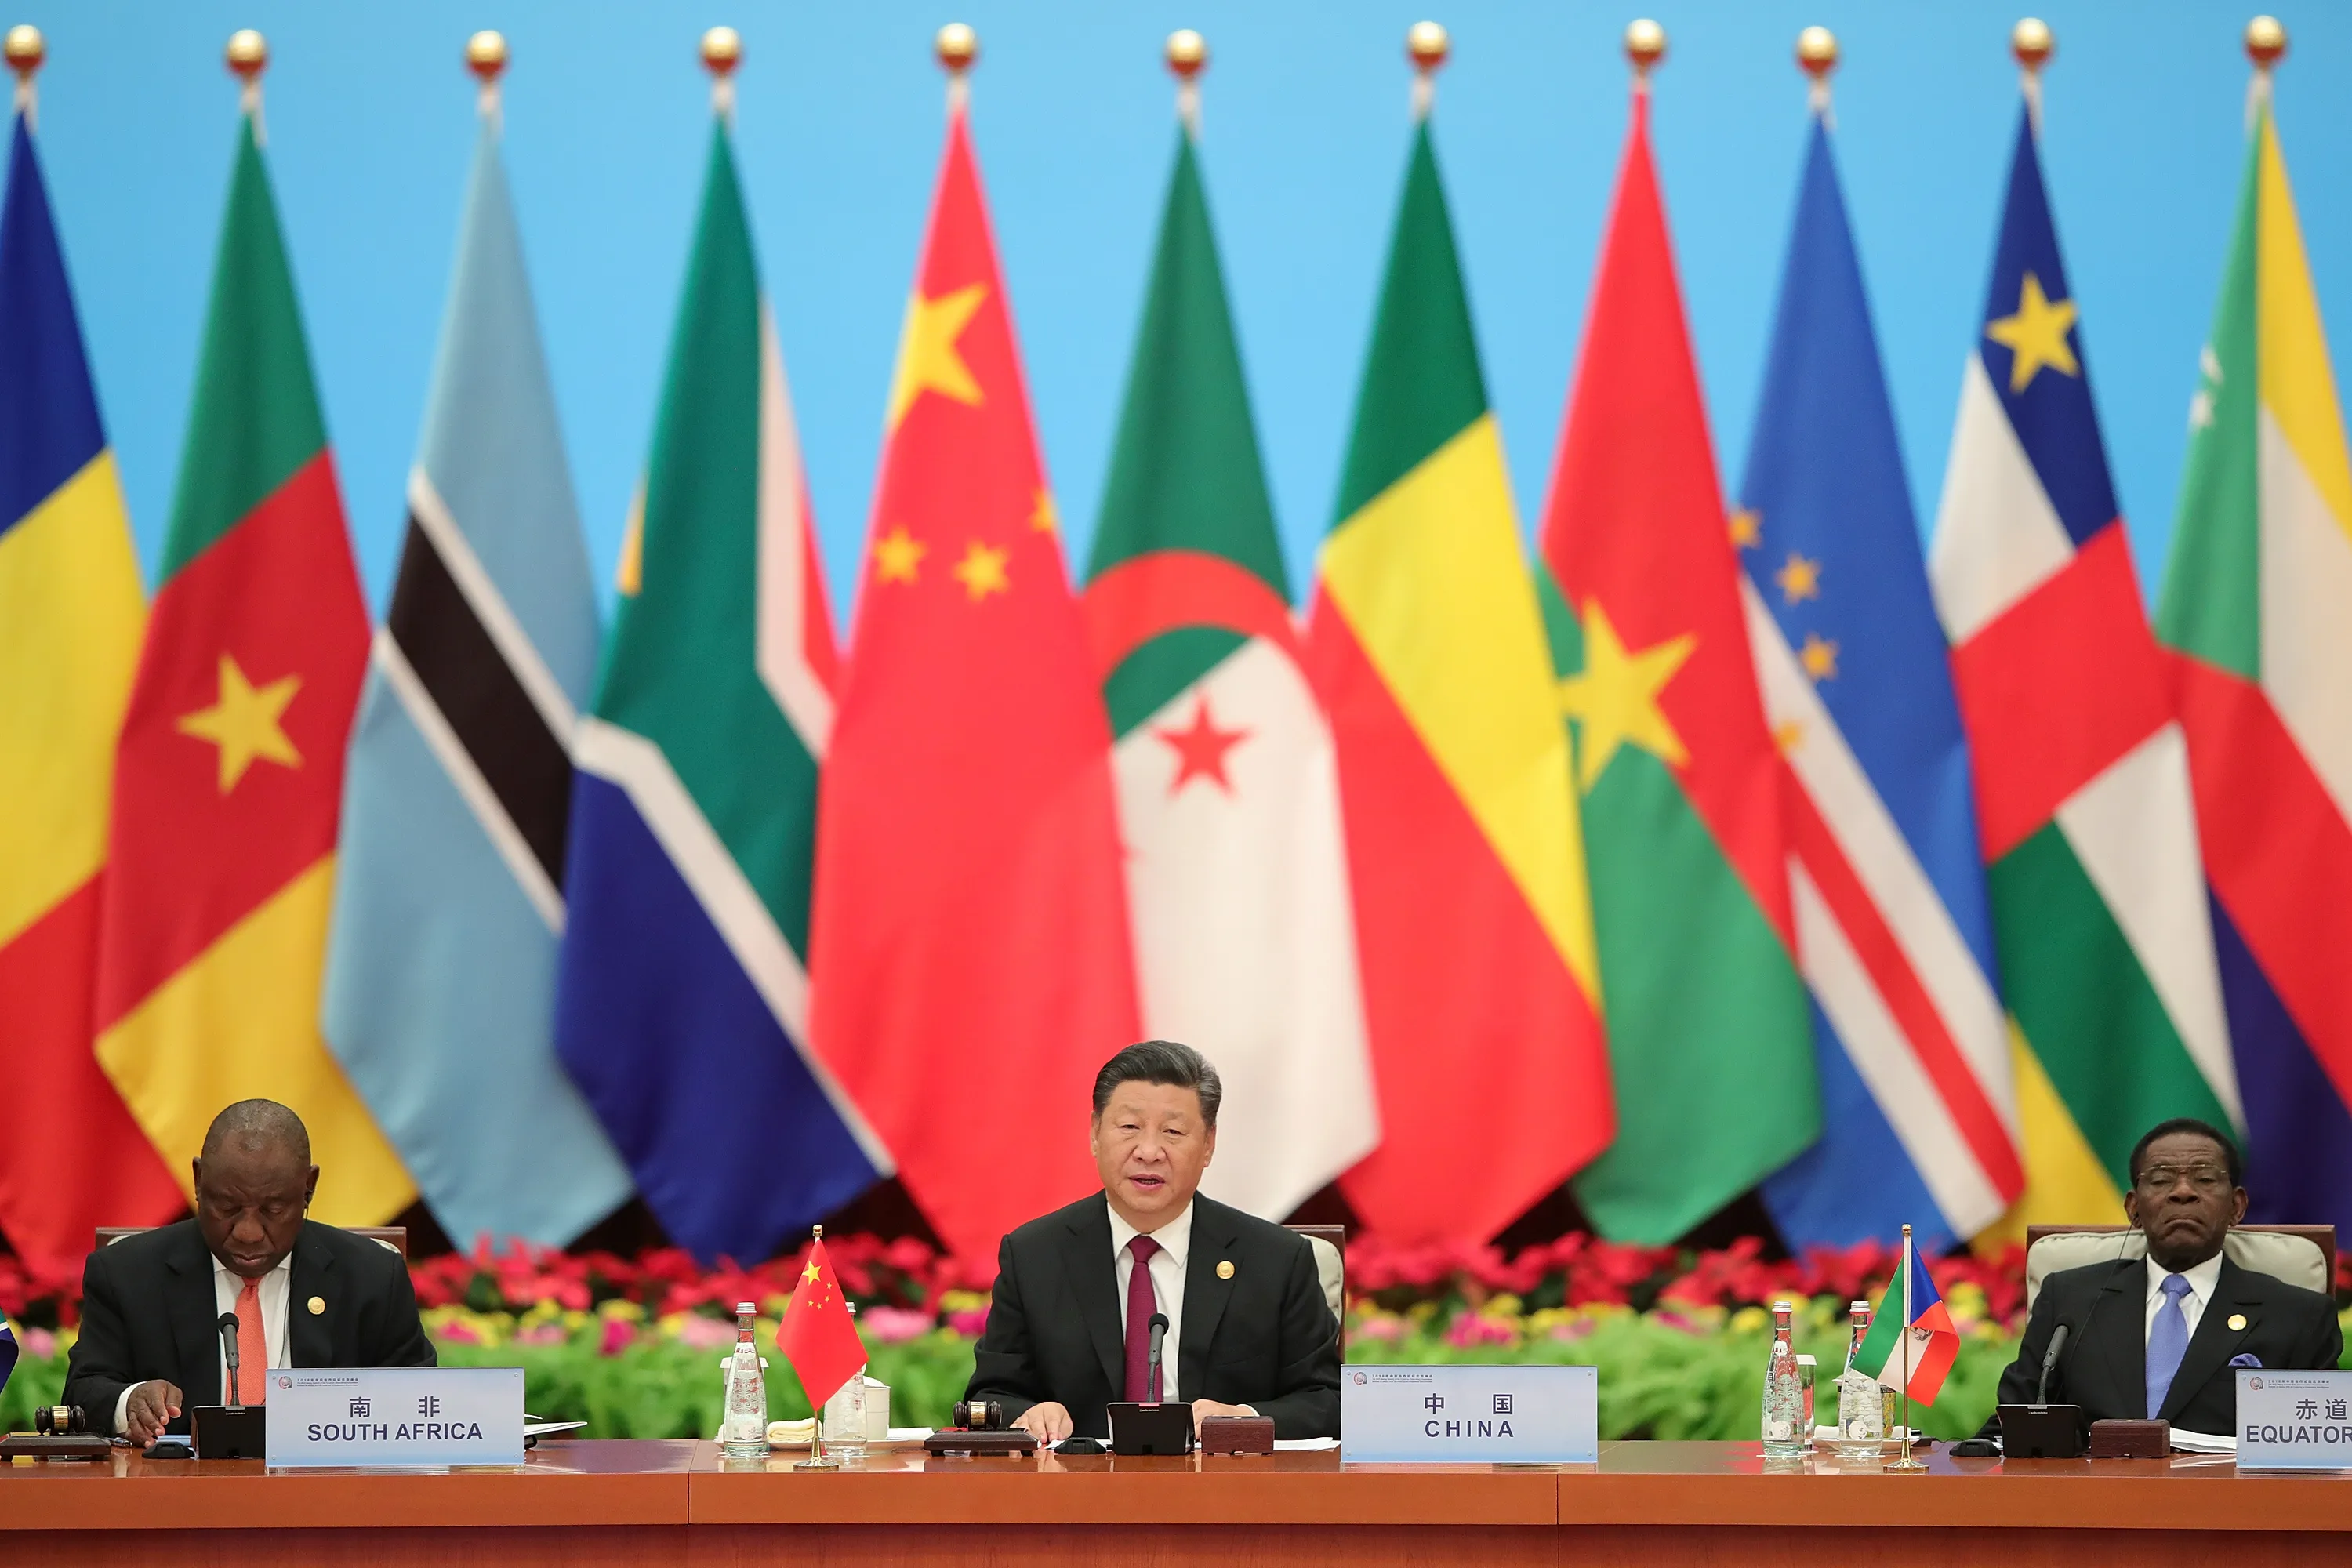 China Africa Relations - Navigating A Complex Partnership